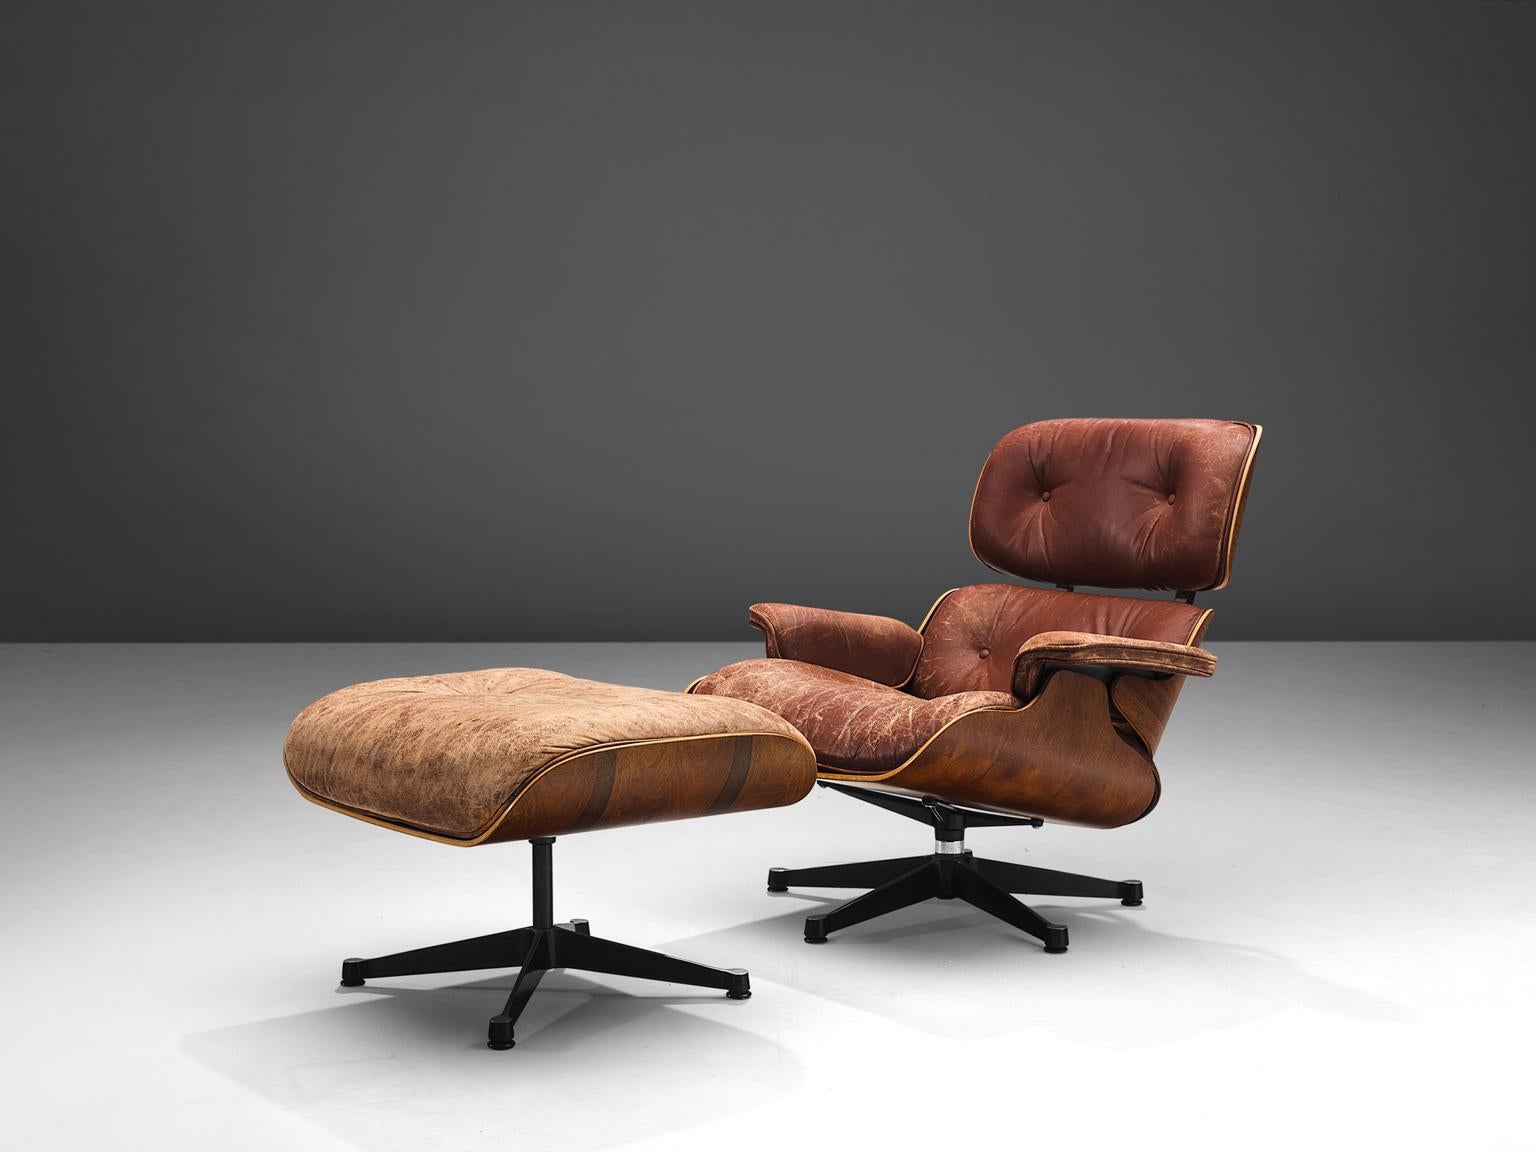 Charles and Ray Eames, lounge chairs and ottoman, with brown colored leather and rosewood, United States, 1956 design, 1960s production.

This iconic set by Charles and Ray Eames is the modernist take on the English club chair and has been the